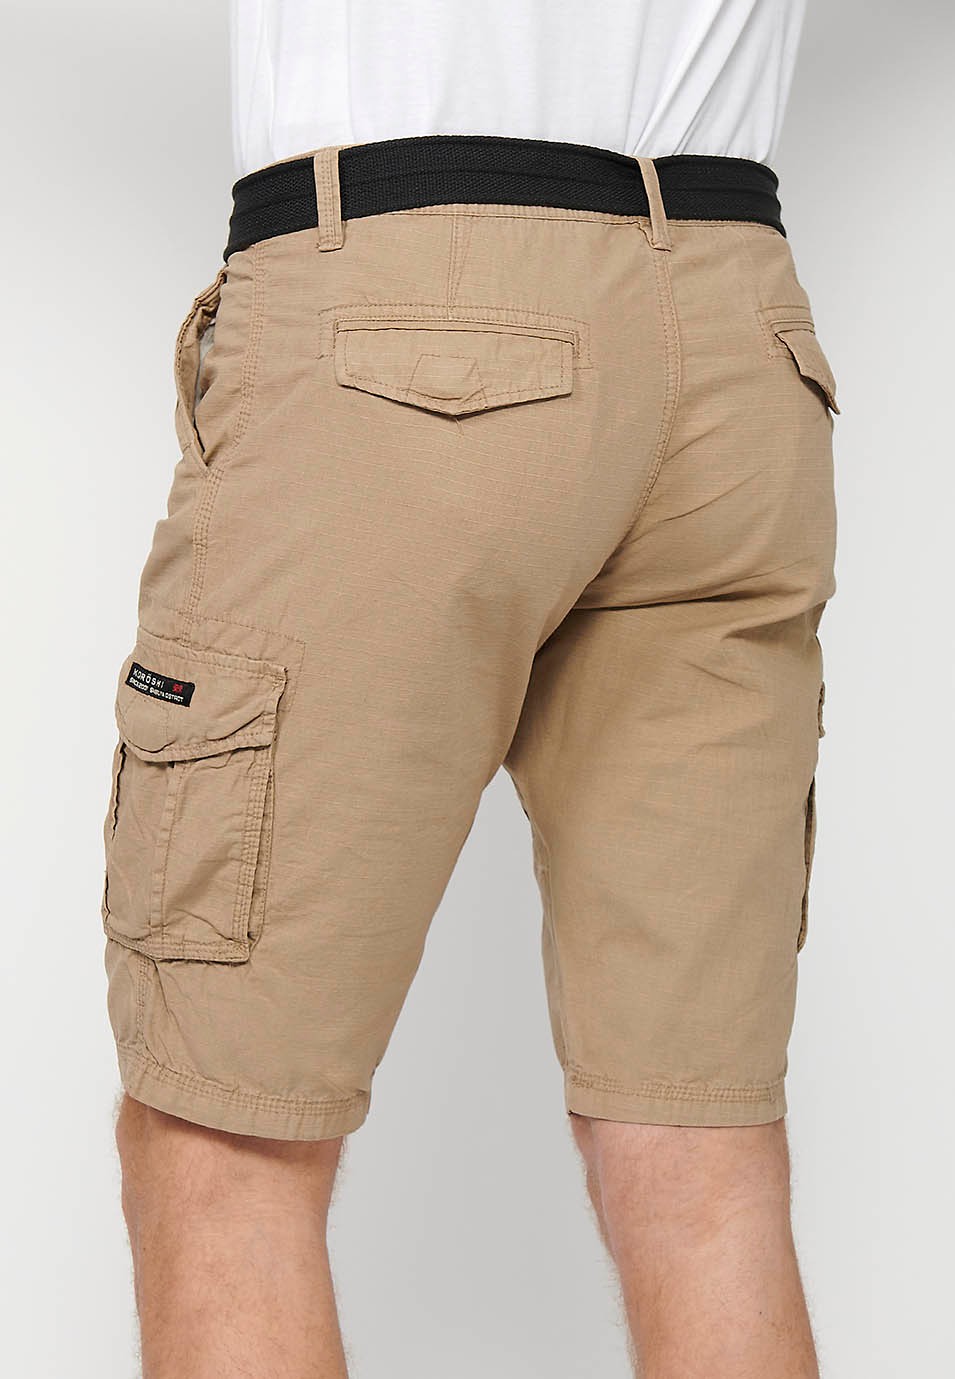 Cotton cargo shorts with belt and front closure with zipper and button with pockets, two back pockets with flap and two cargo pants in Beige Color for Men 6